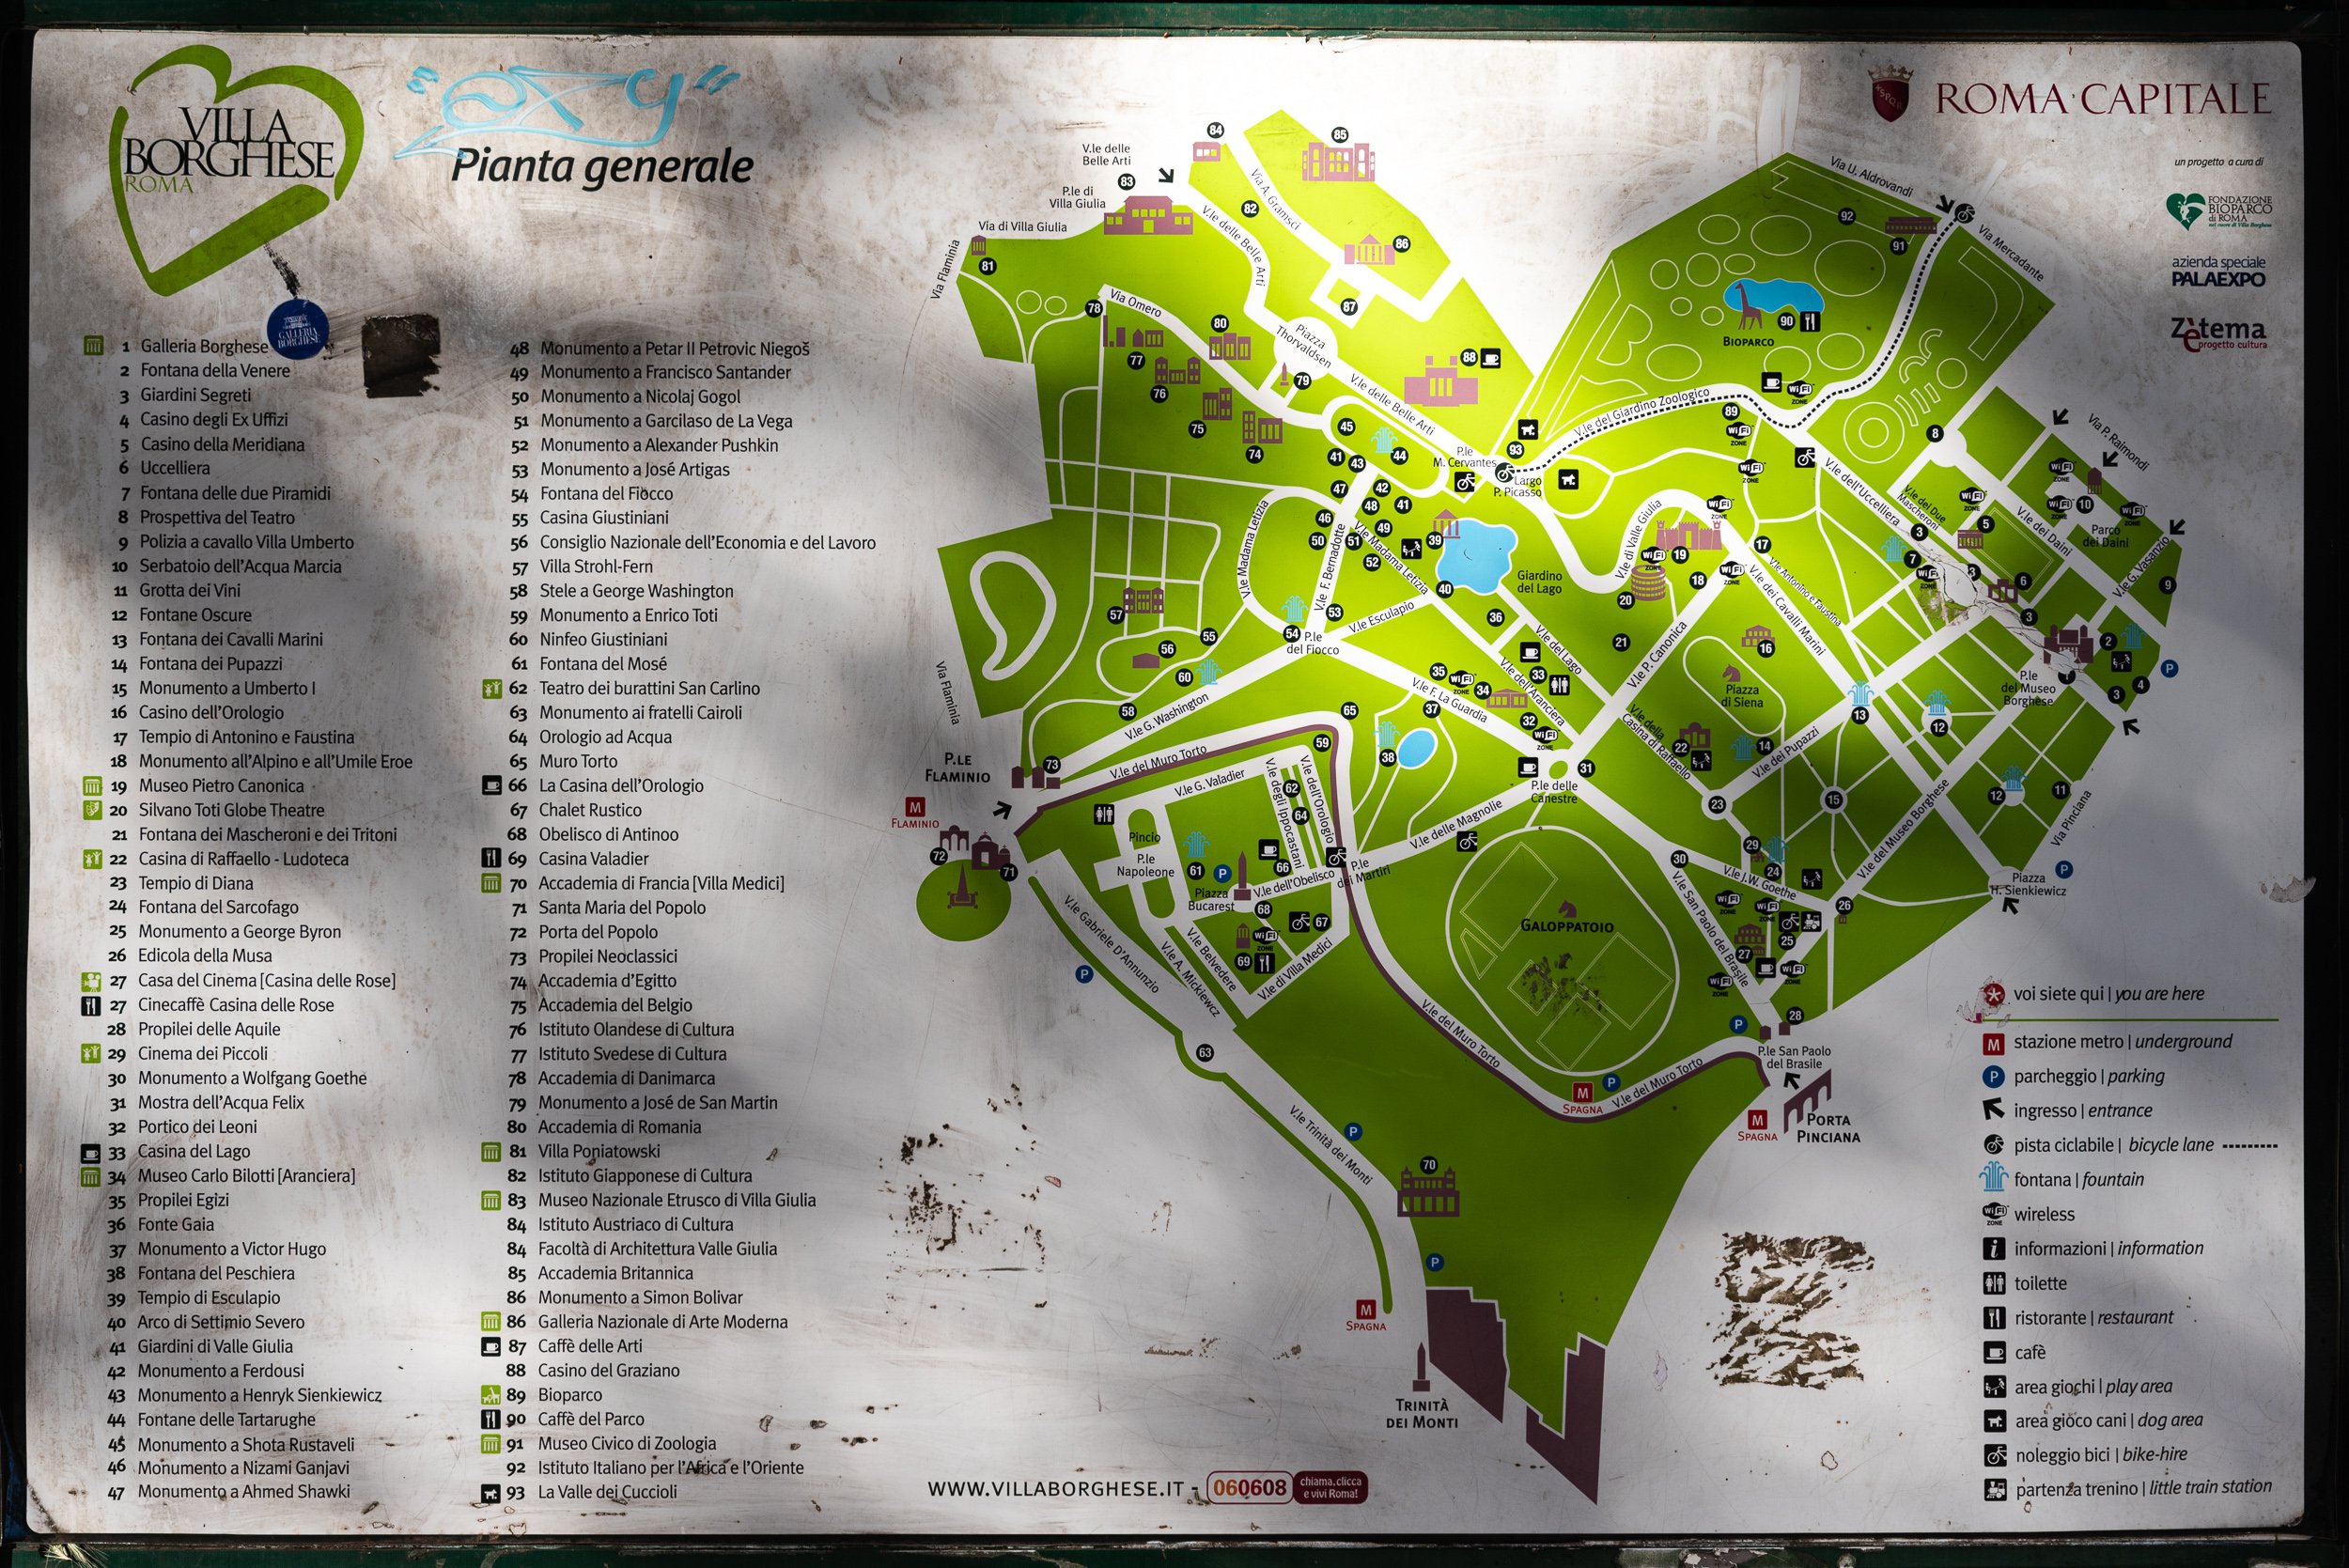 Rome travel itinerary - Map of Park